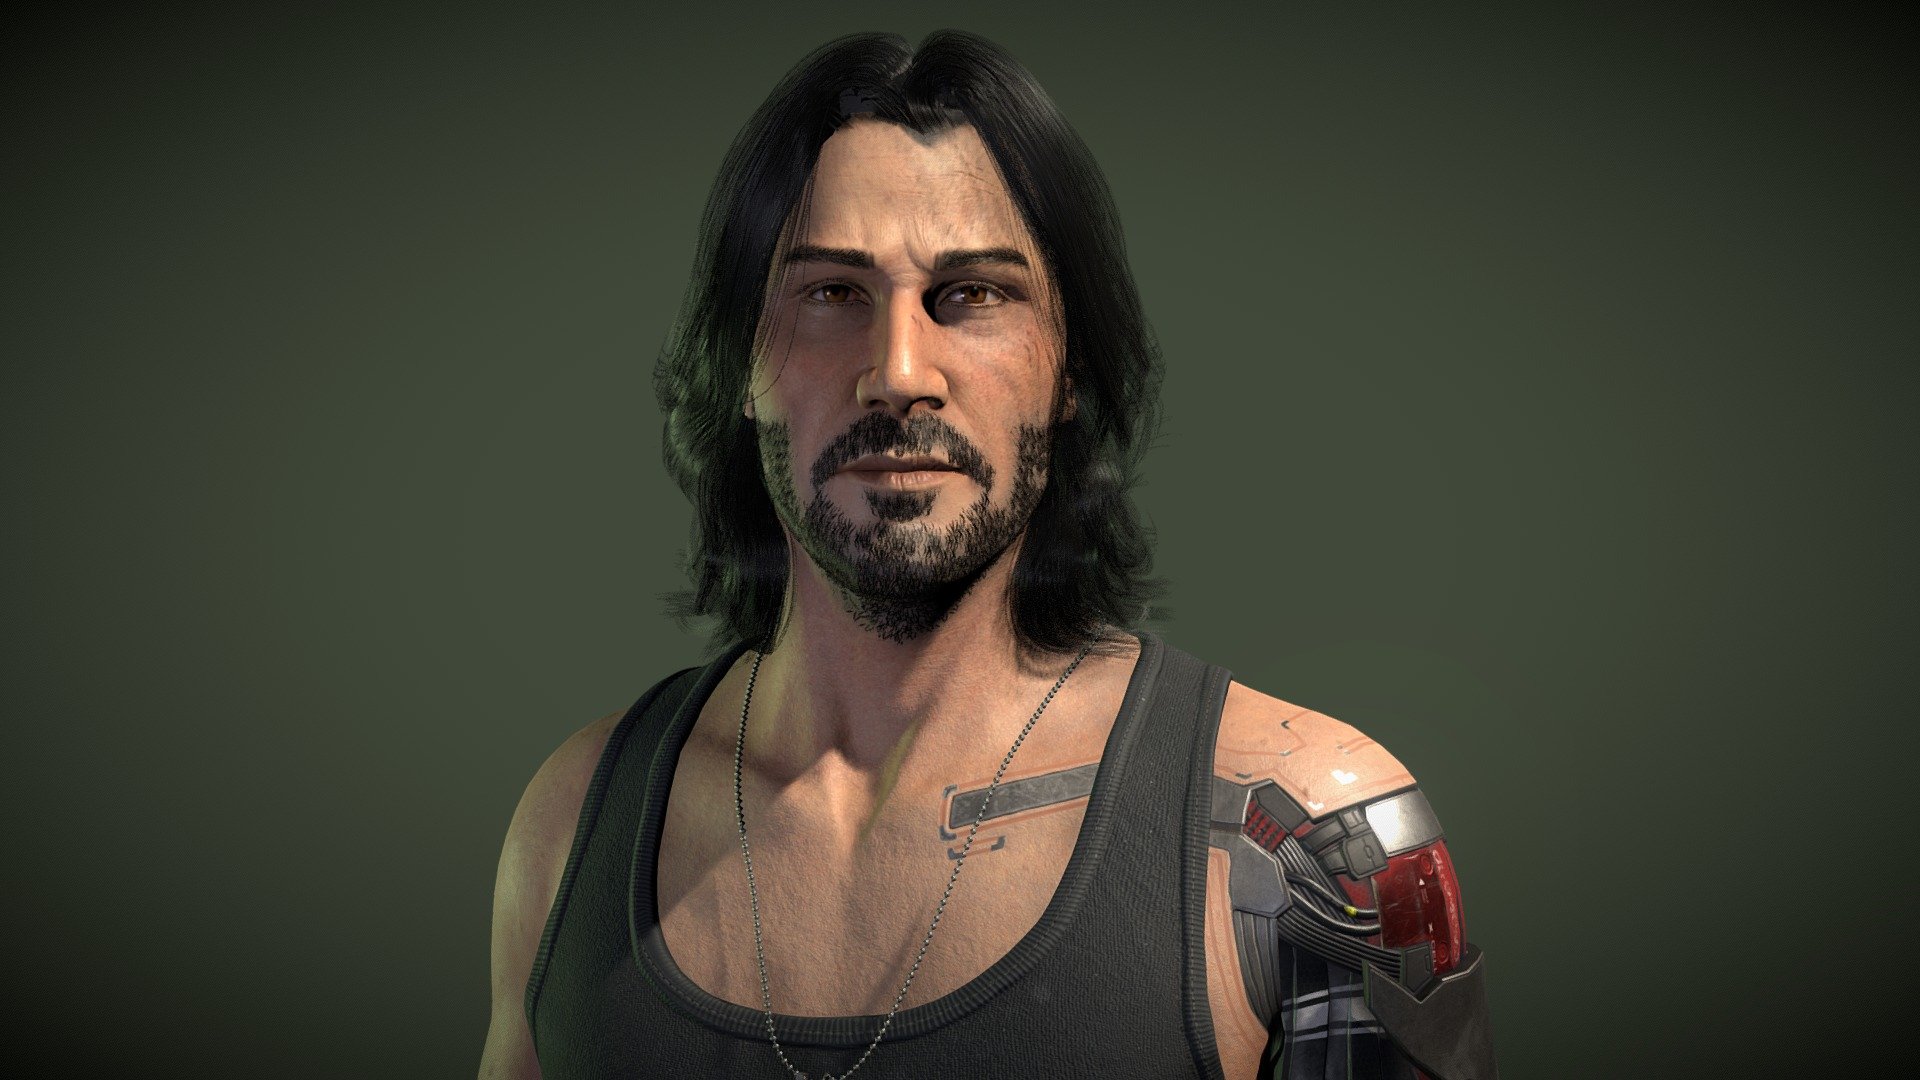 Cyberpunk 2077,Johnny Silverhand,Game Character,Keanu Reeves,3d Printed ...